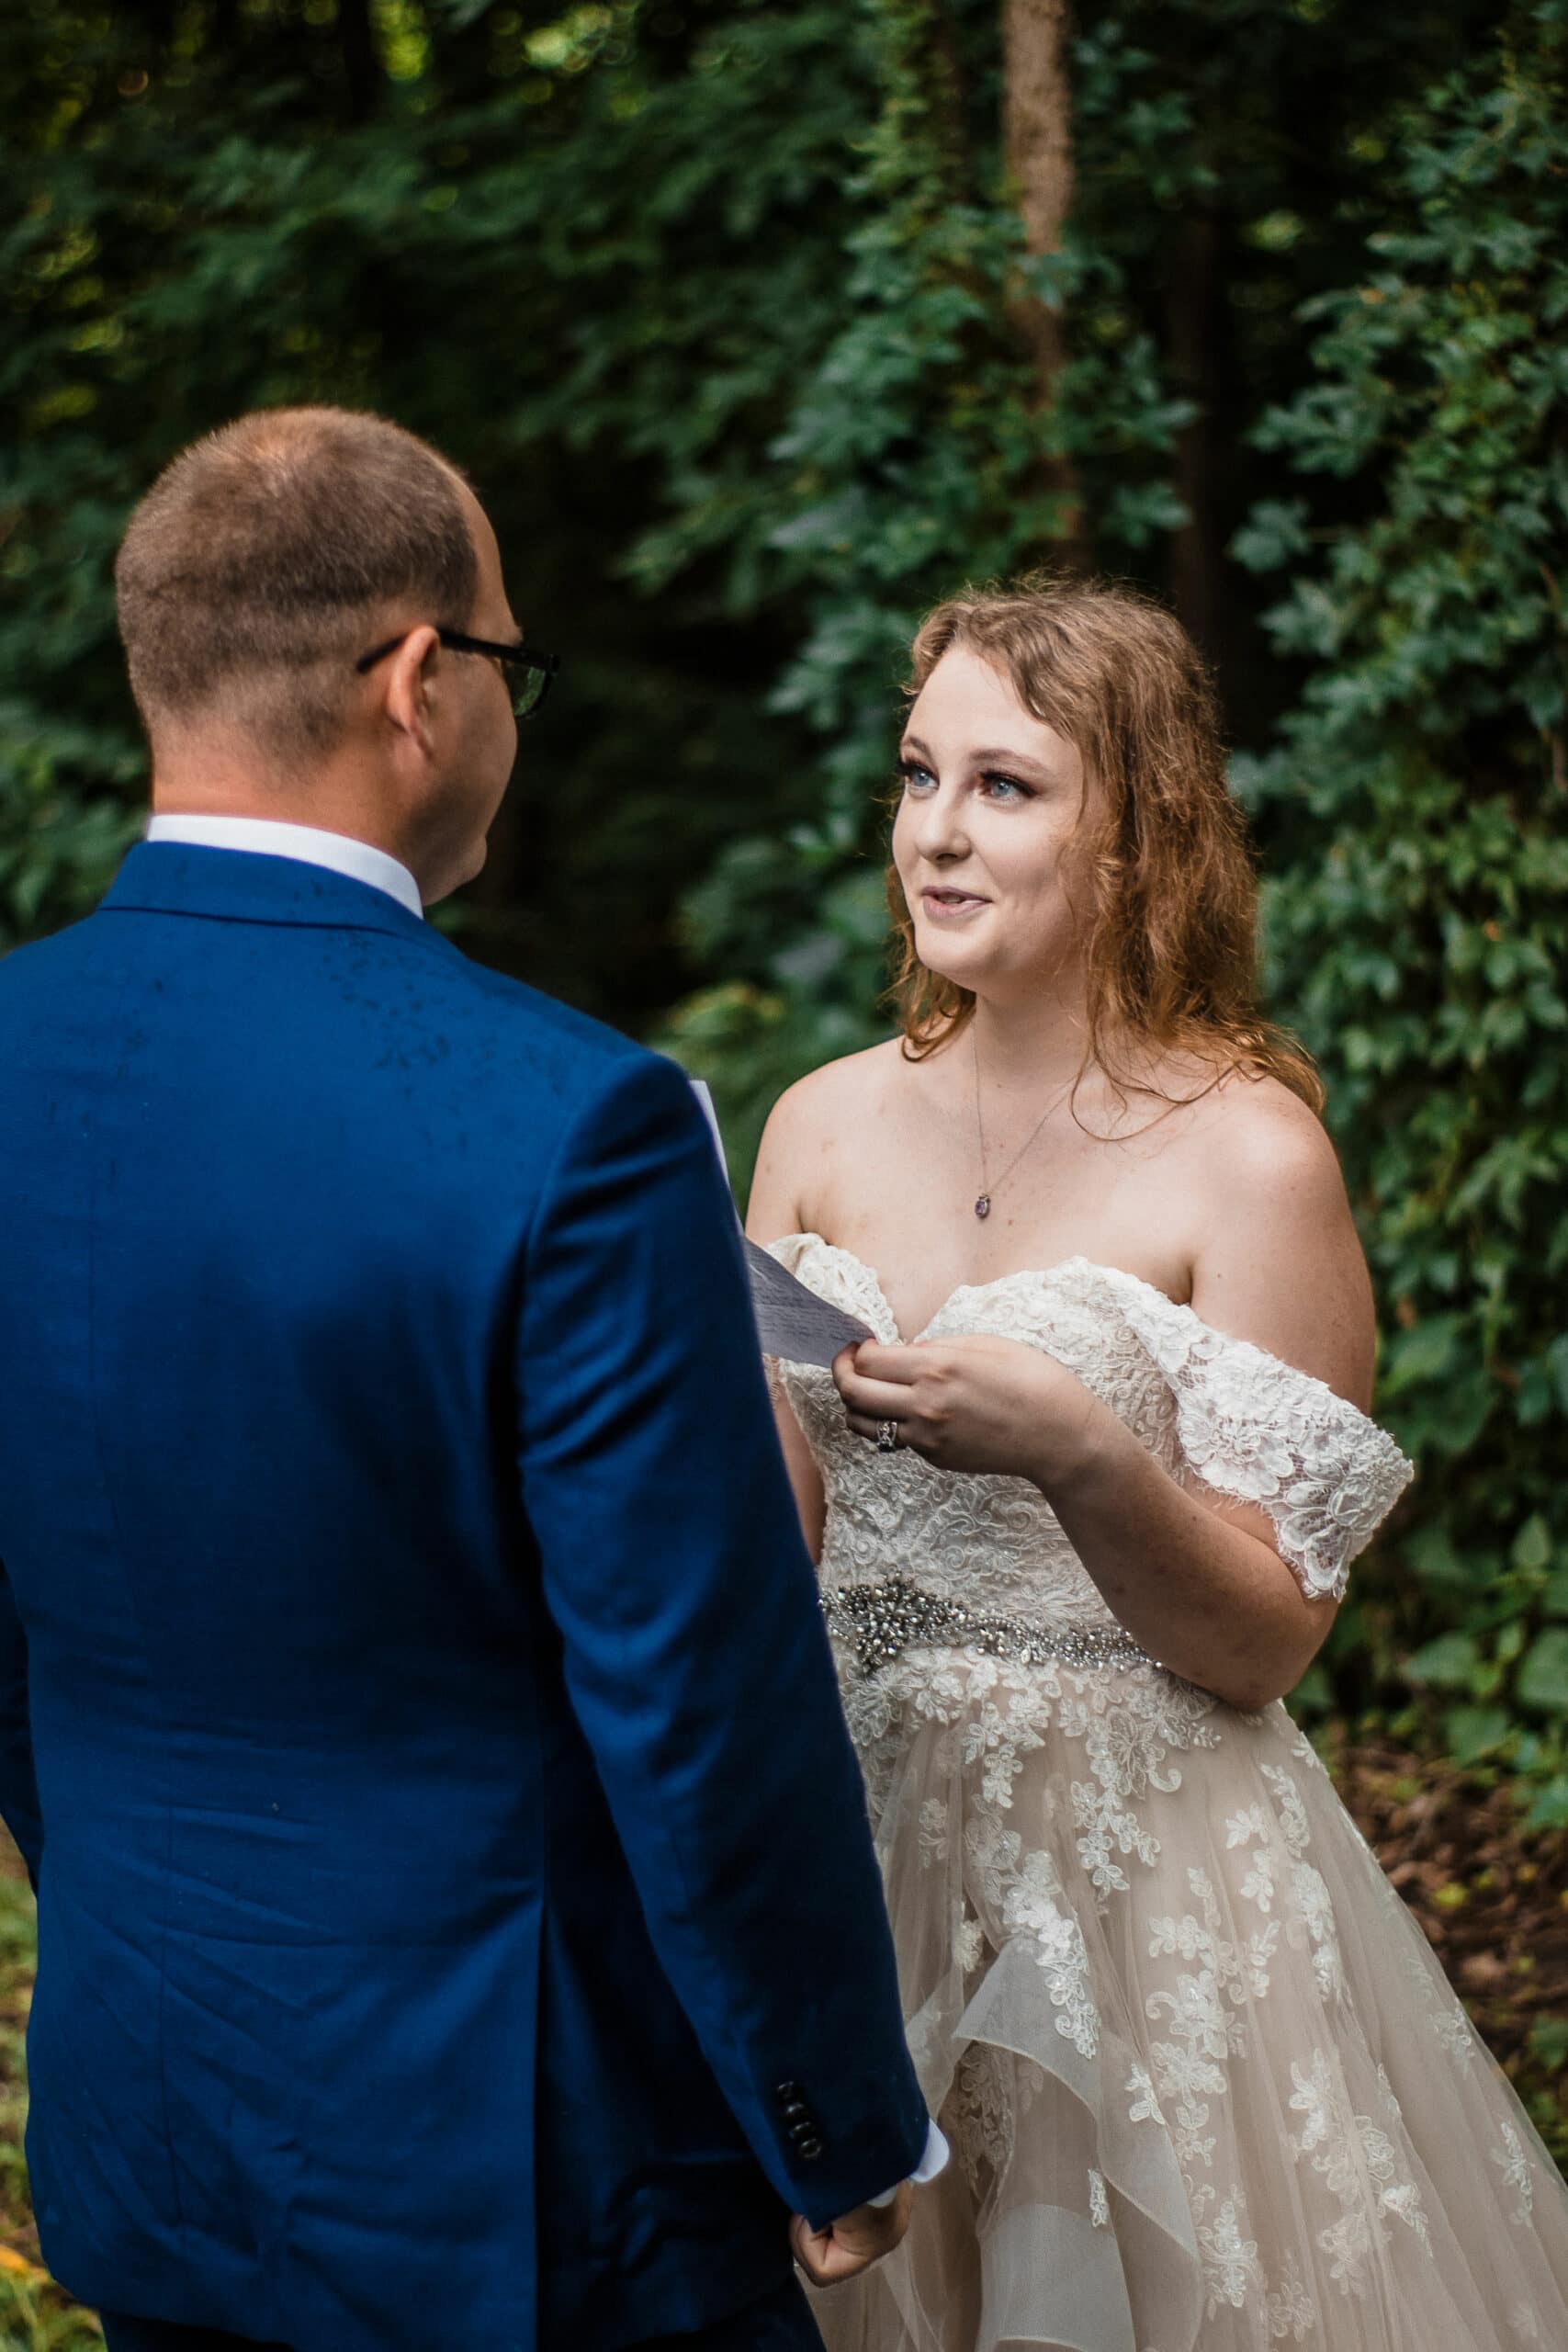 couple exchanges vows at forest sunset elopement location